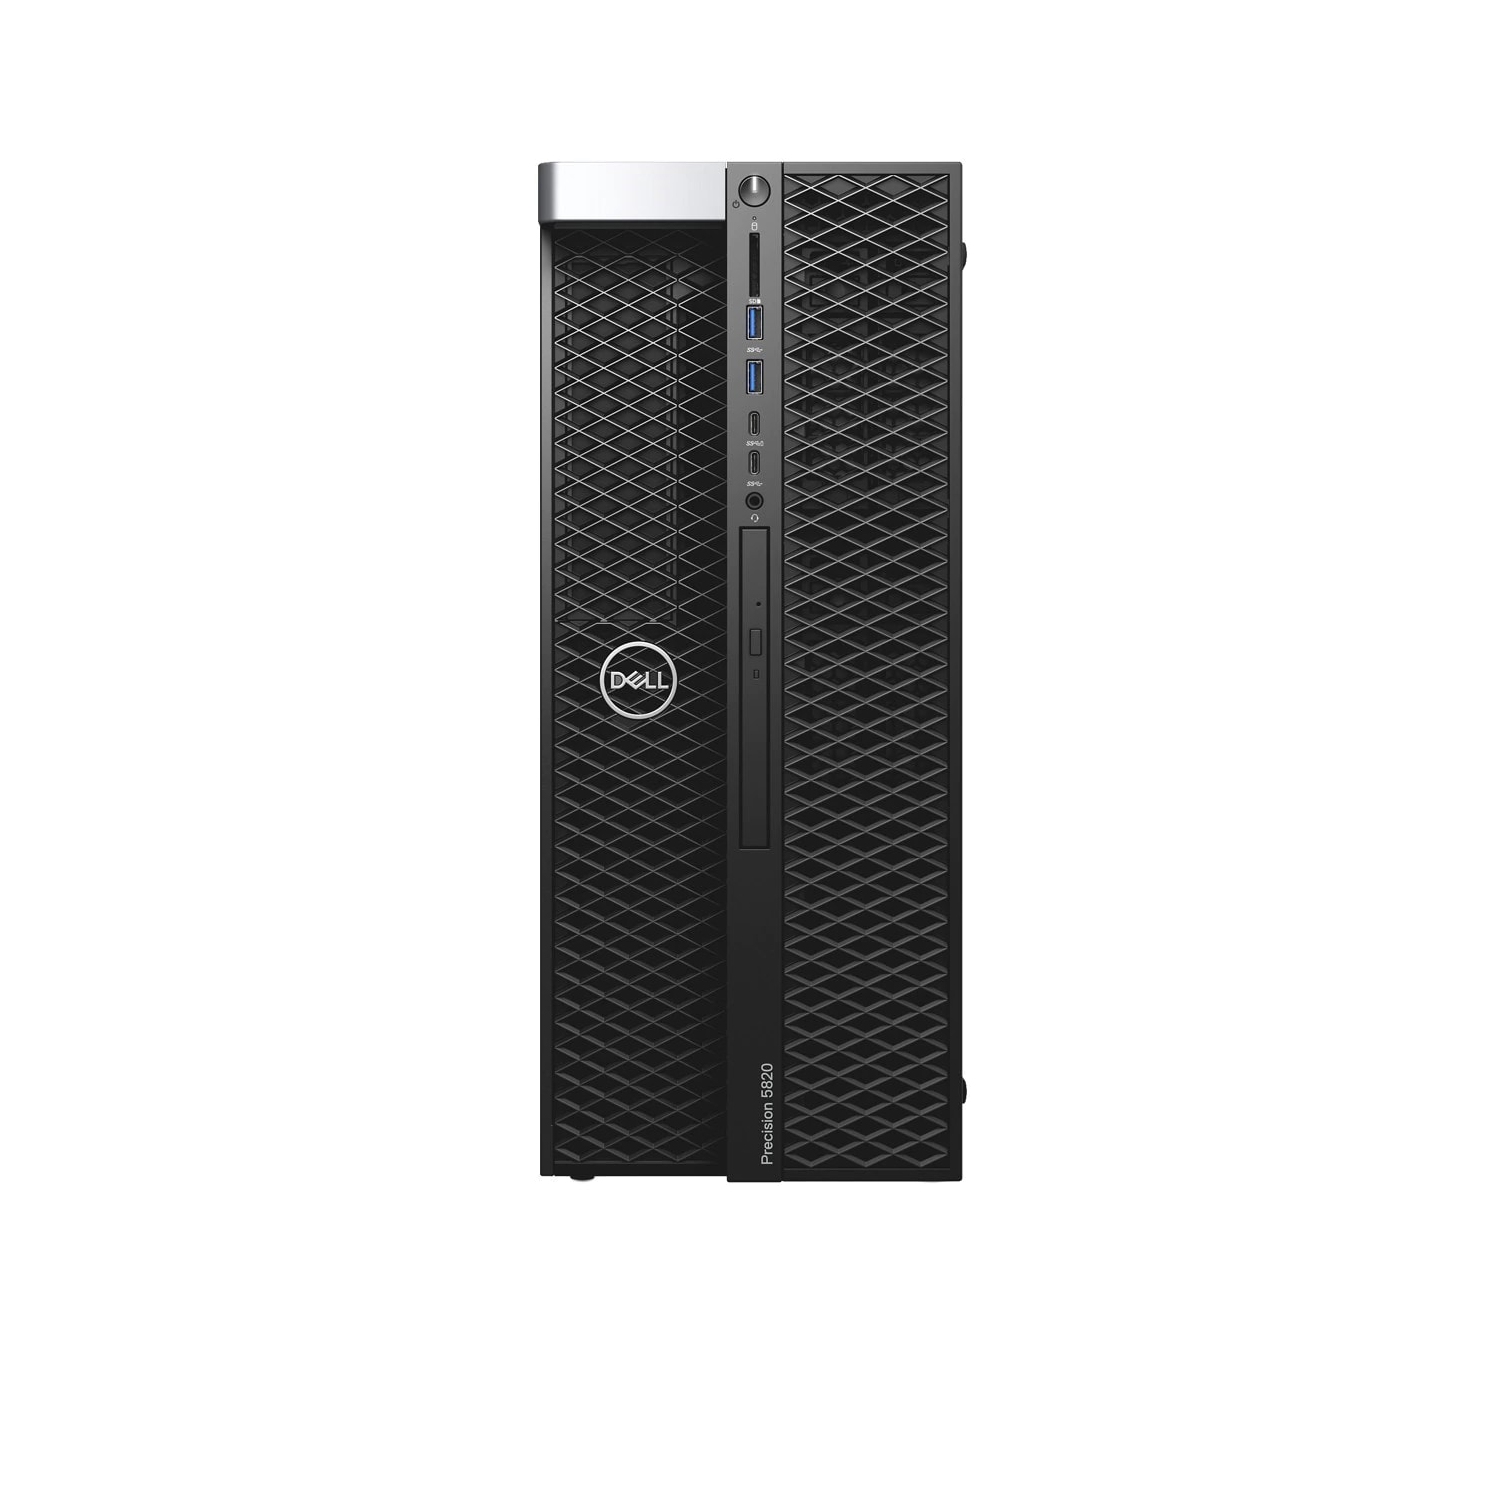 Refurbished (Excellent) - Dell Precision T5820 Workstation Desktop (2018) | Core Xeon W - 1TB SSD - 64GB RAM - RTX 4000 | 4 Cores @ 4.6 GHz Certified Refurbished